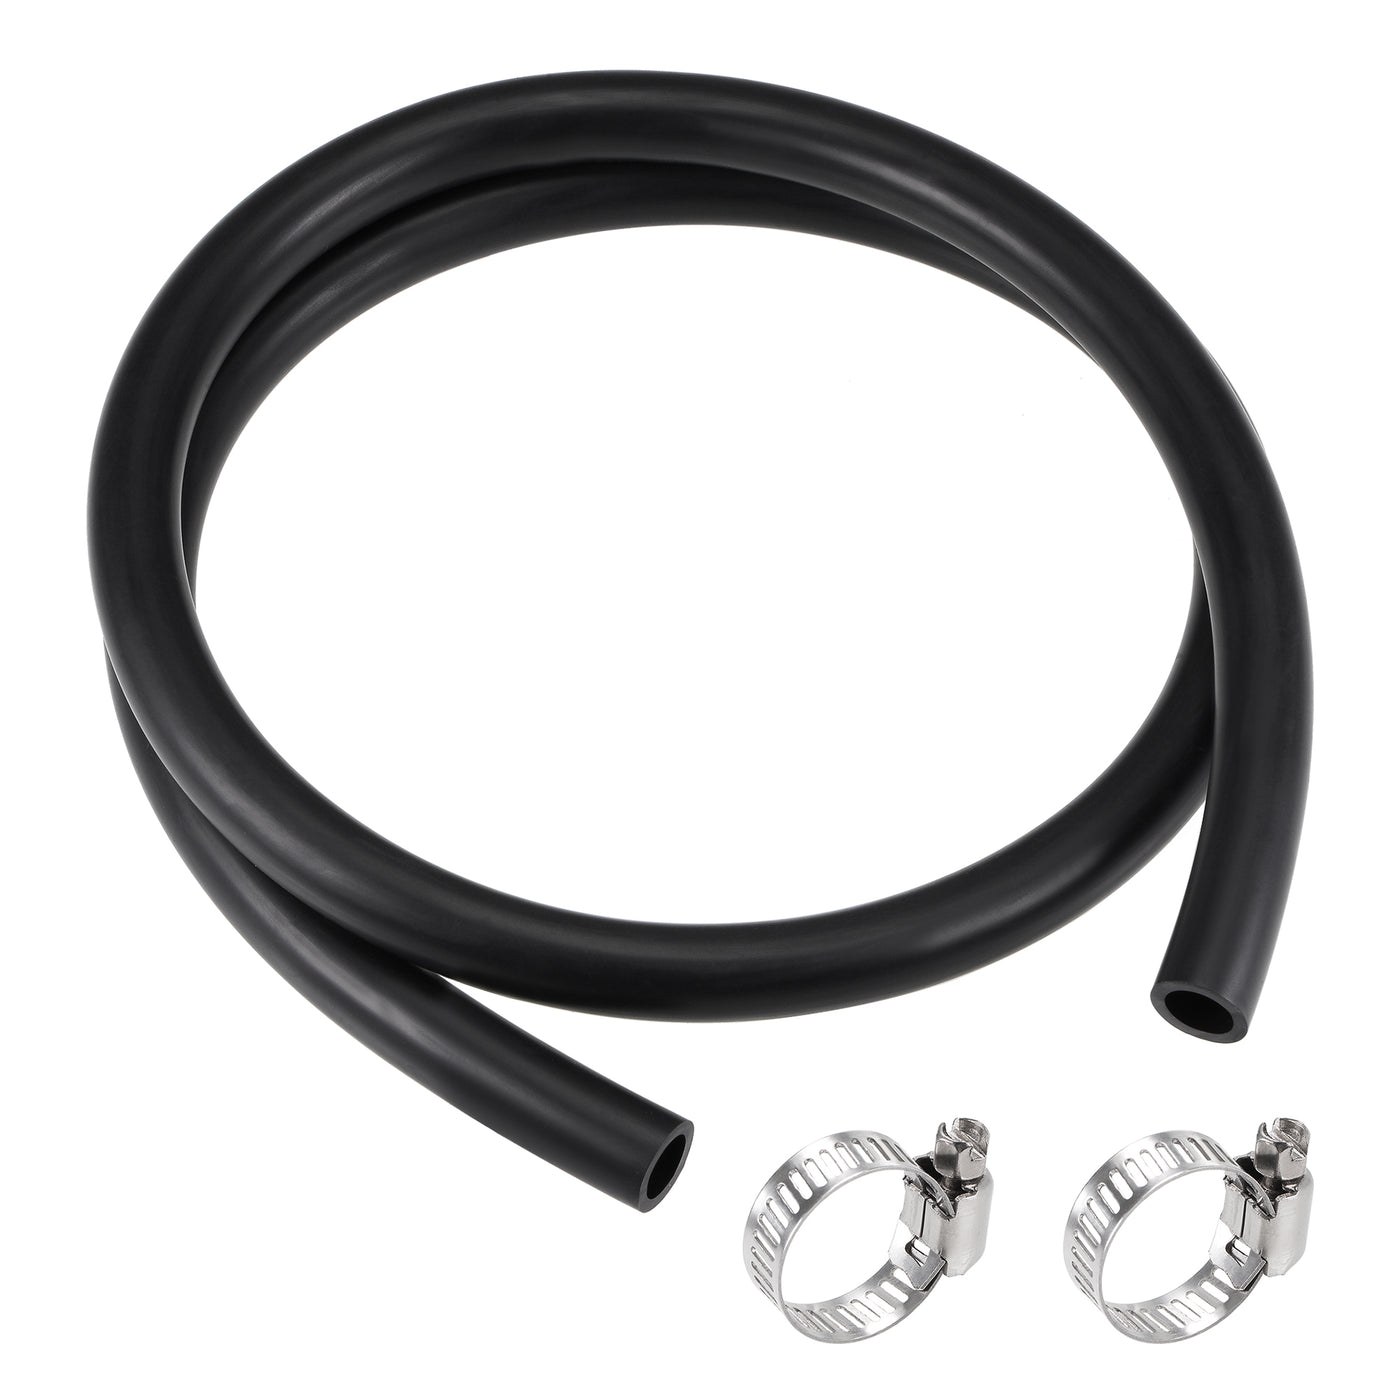 Uxcell Uxcell Fuel Line Hose 10mm ID 16mm OD 3.3ft Oil Line & Fuel Pipe Rubber Water Hose Black, 2 Clamps